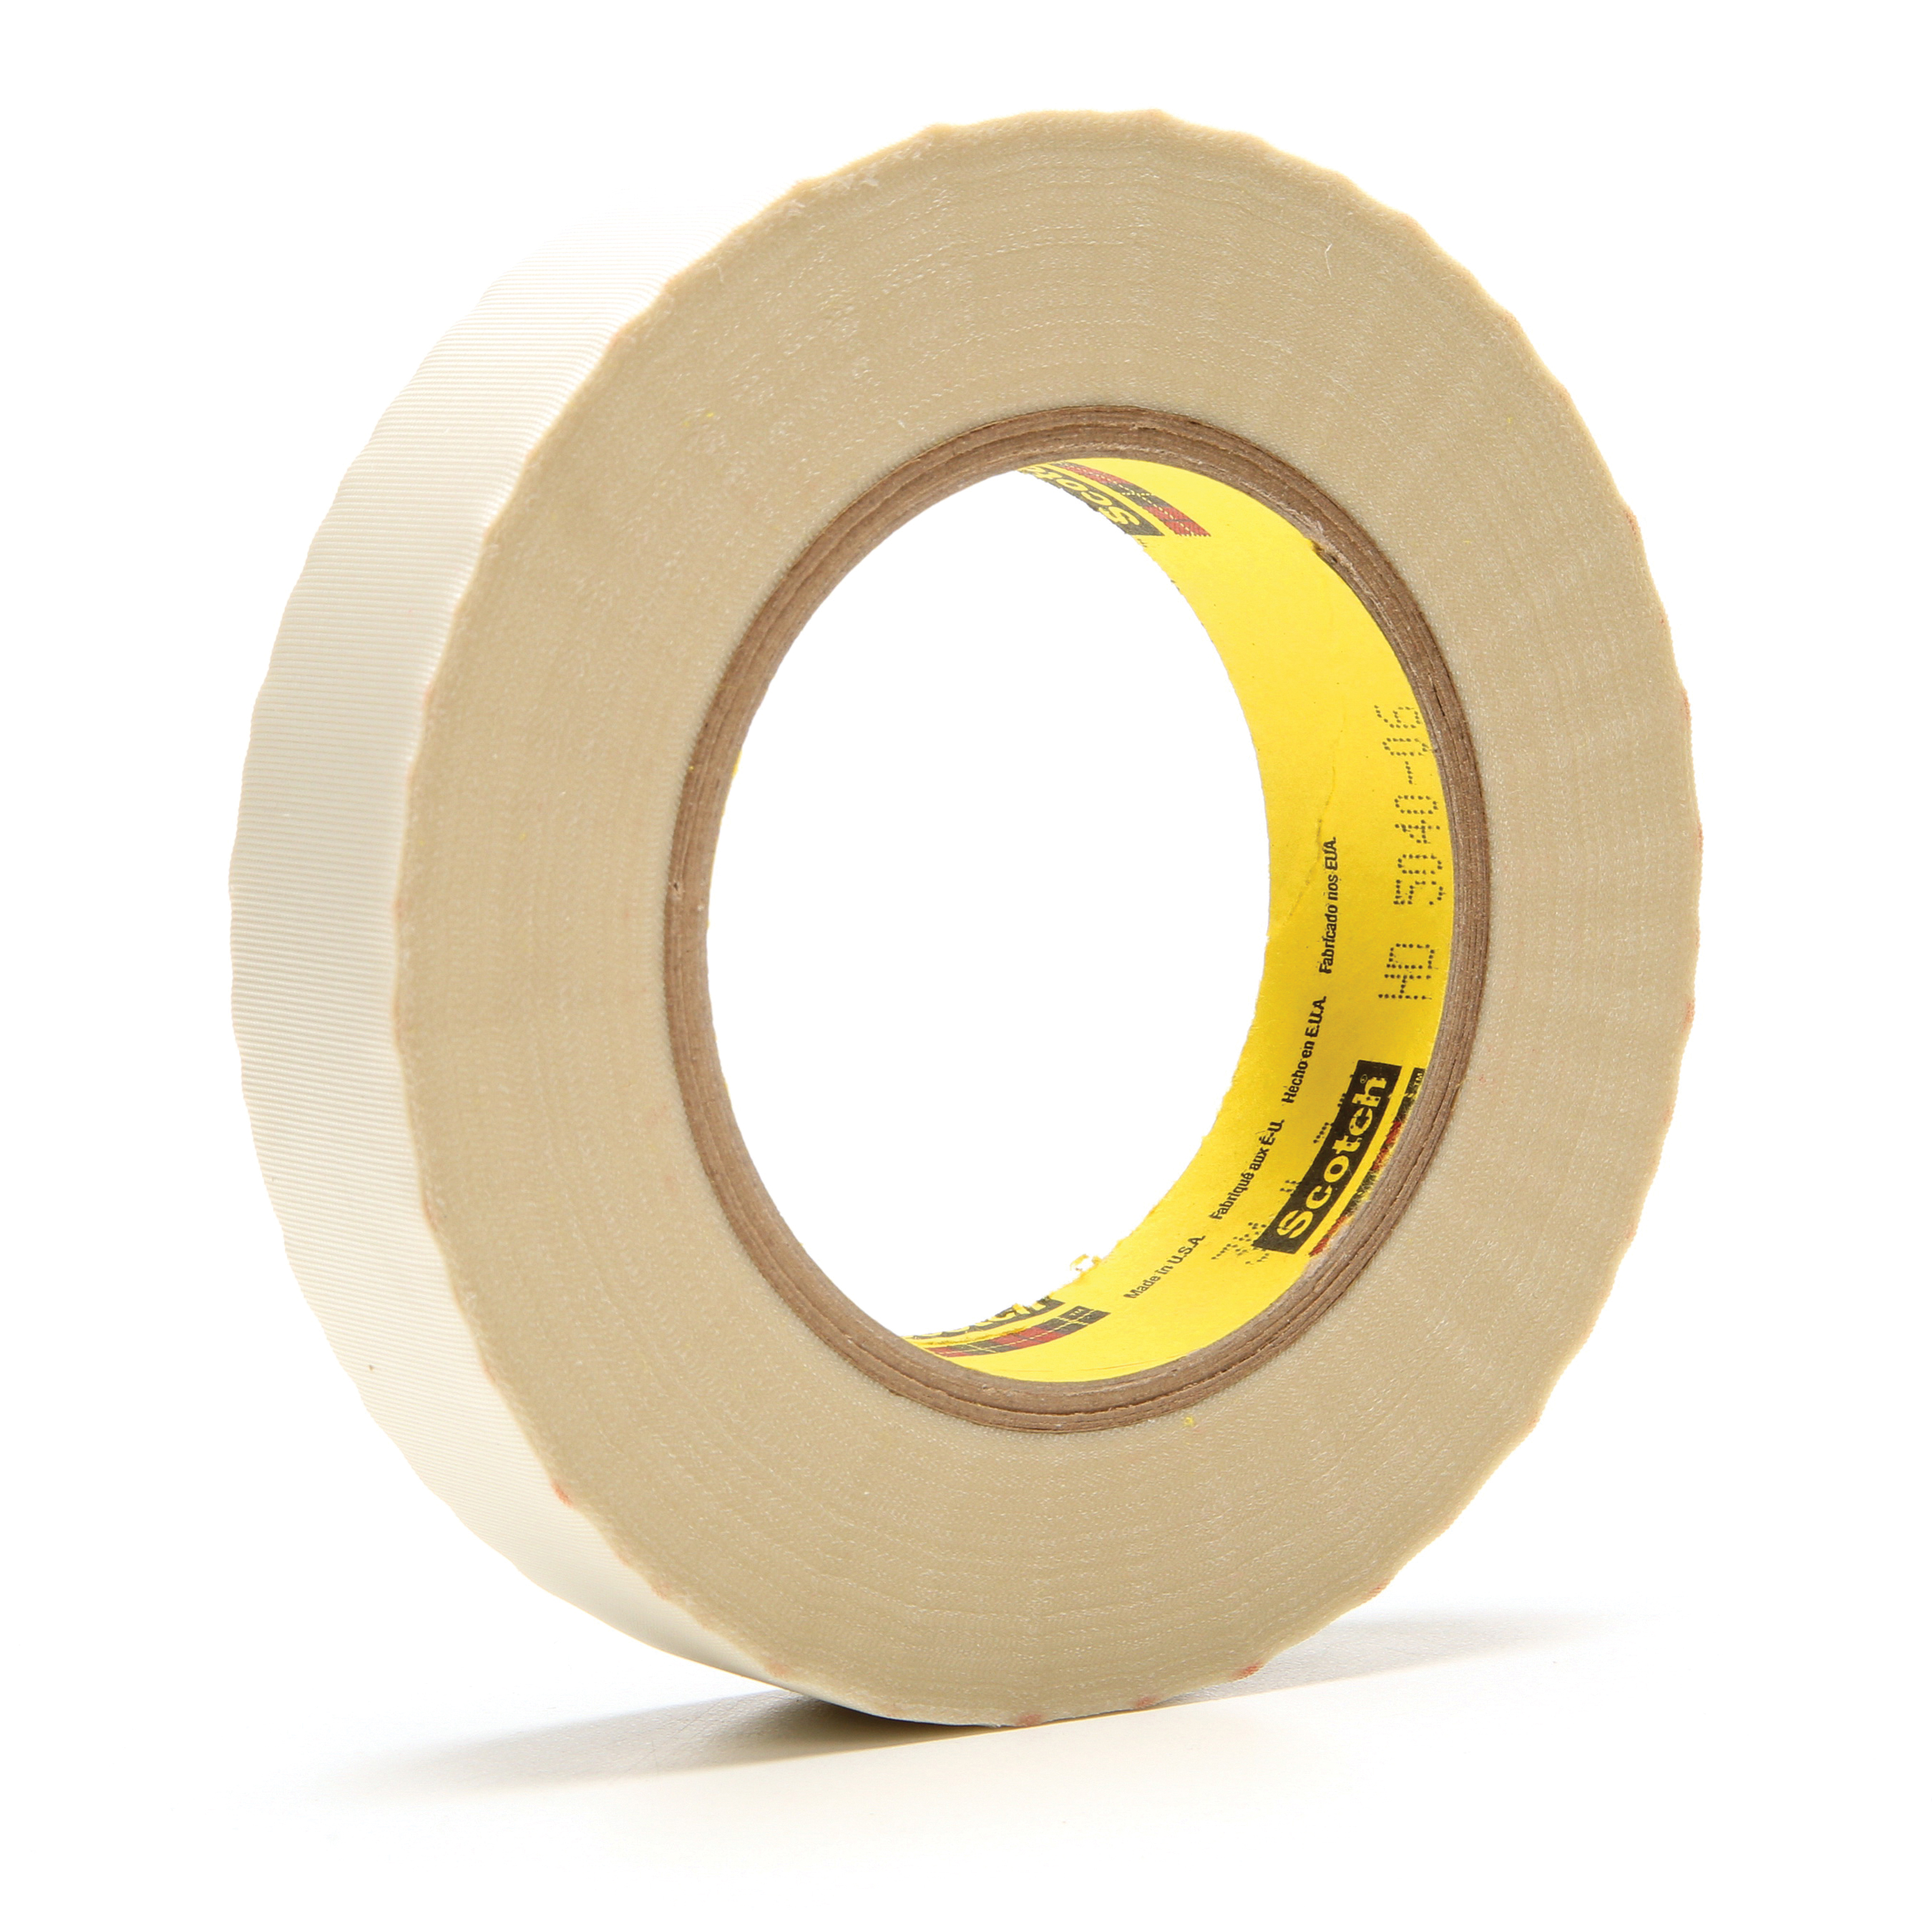 3M™ 021200-23713 Cloth Tape, 60 yd L x 1 in W, 6.4 mil THK, Silicon Adhesive, Glass Cloth Backing, White